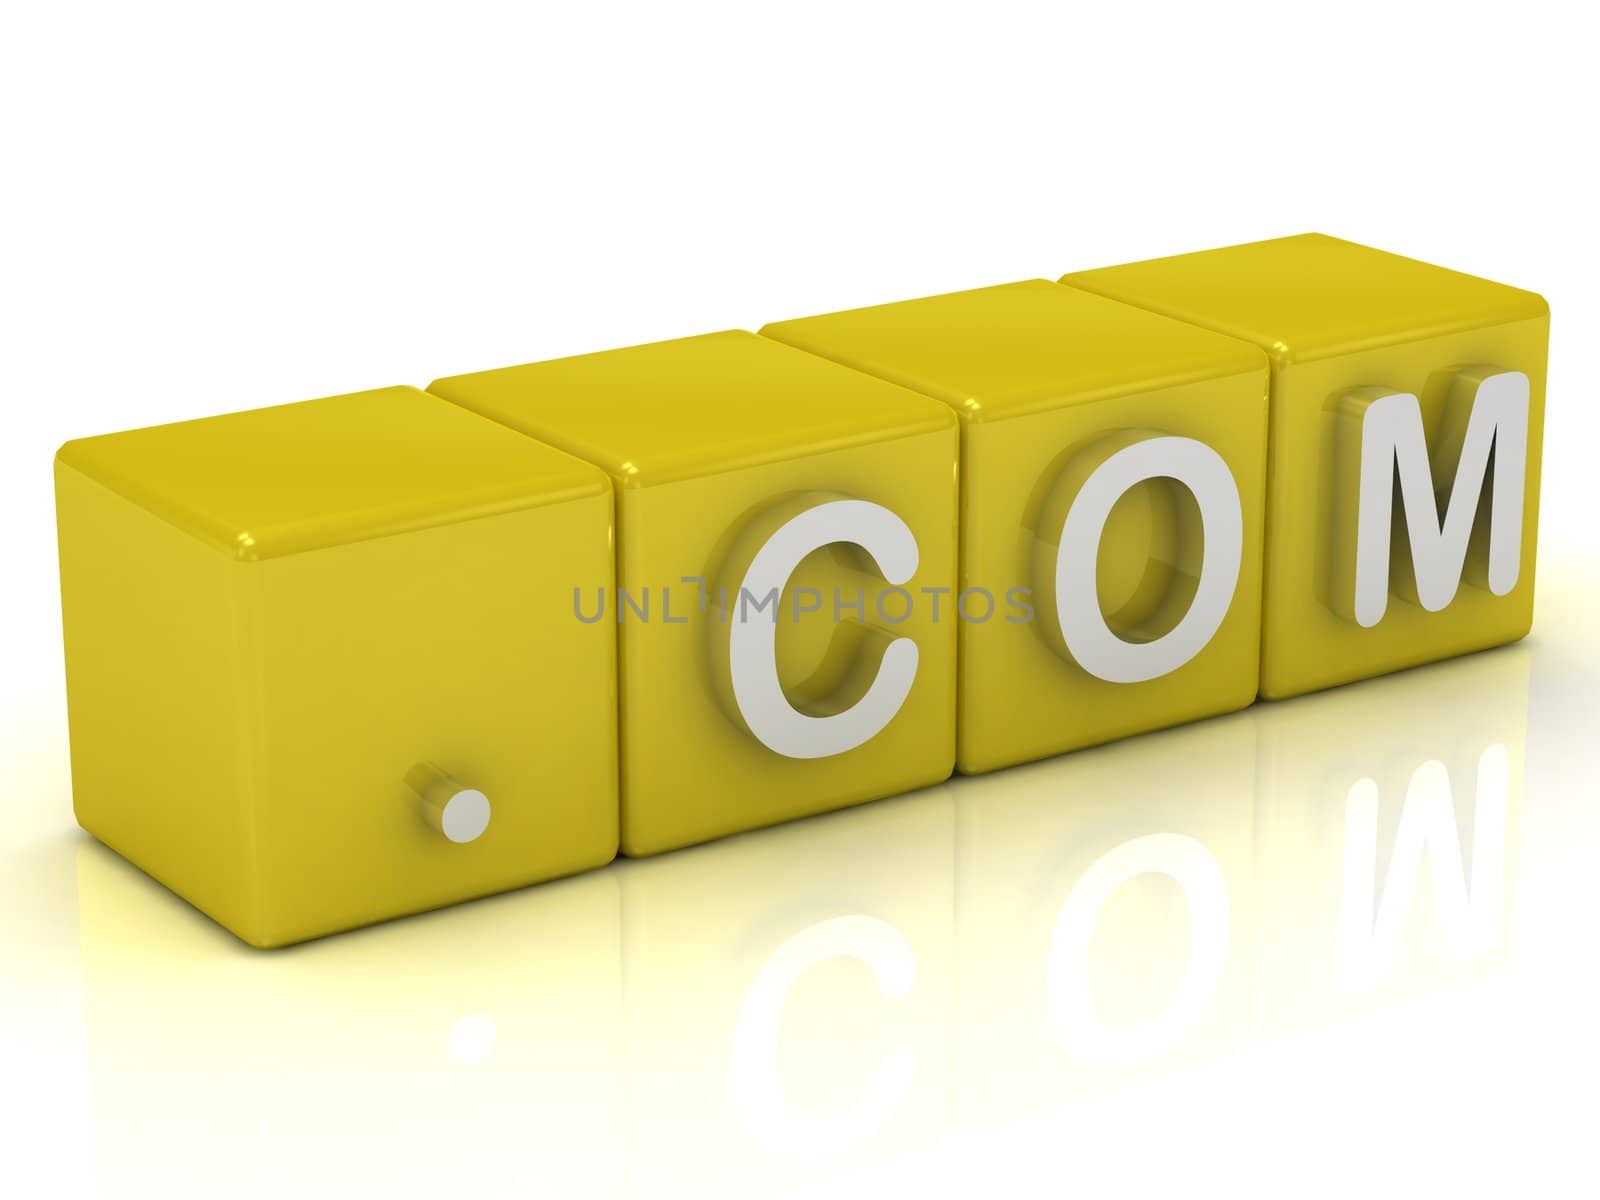 Inscription on the cubes of gold: dot com on a white background